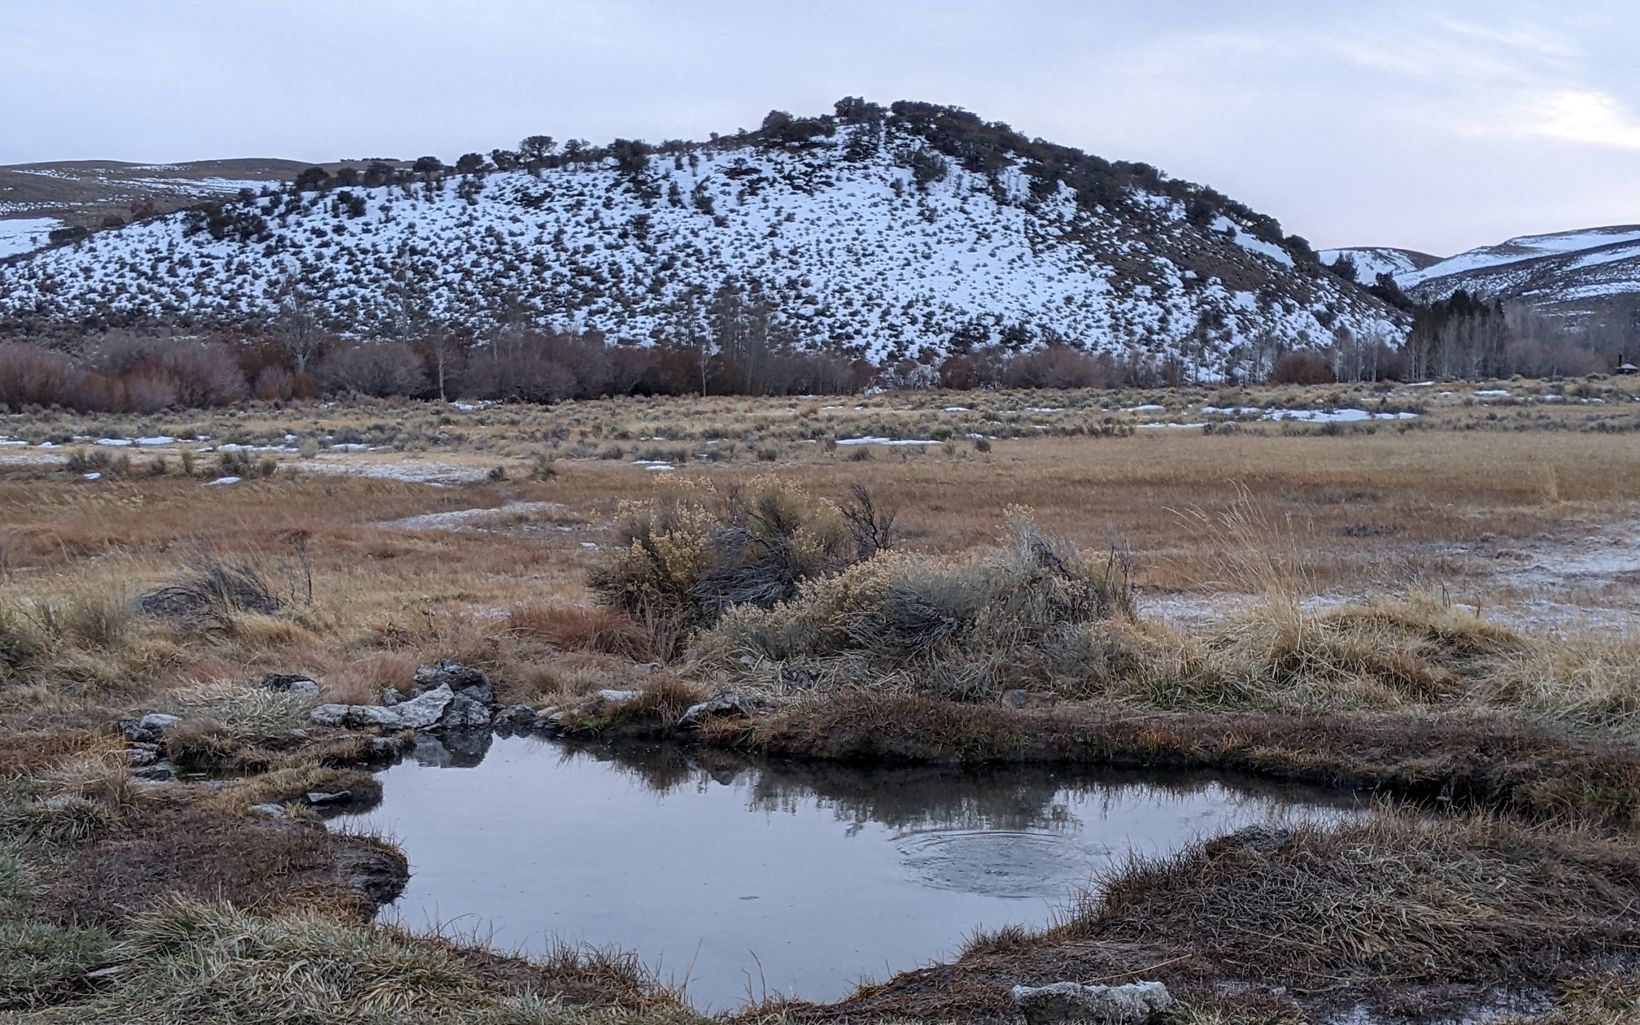 Hot springs in an arid field with a snowy hillside in the background.